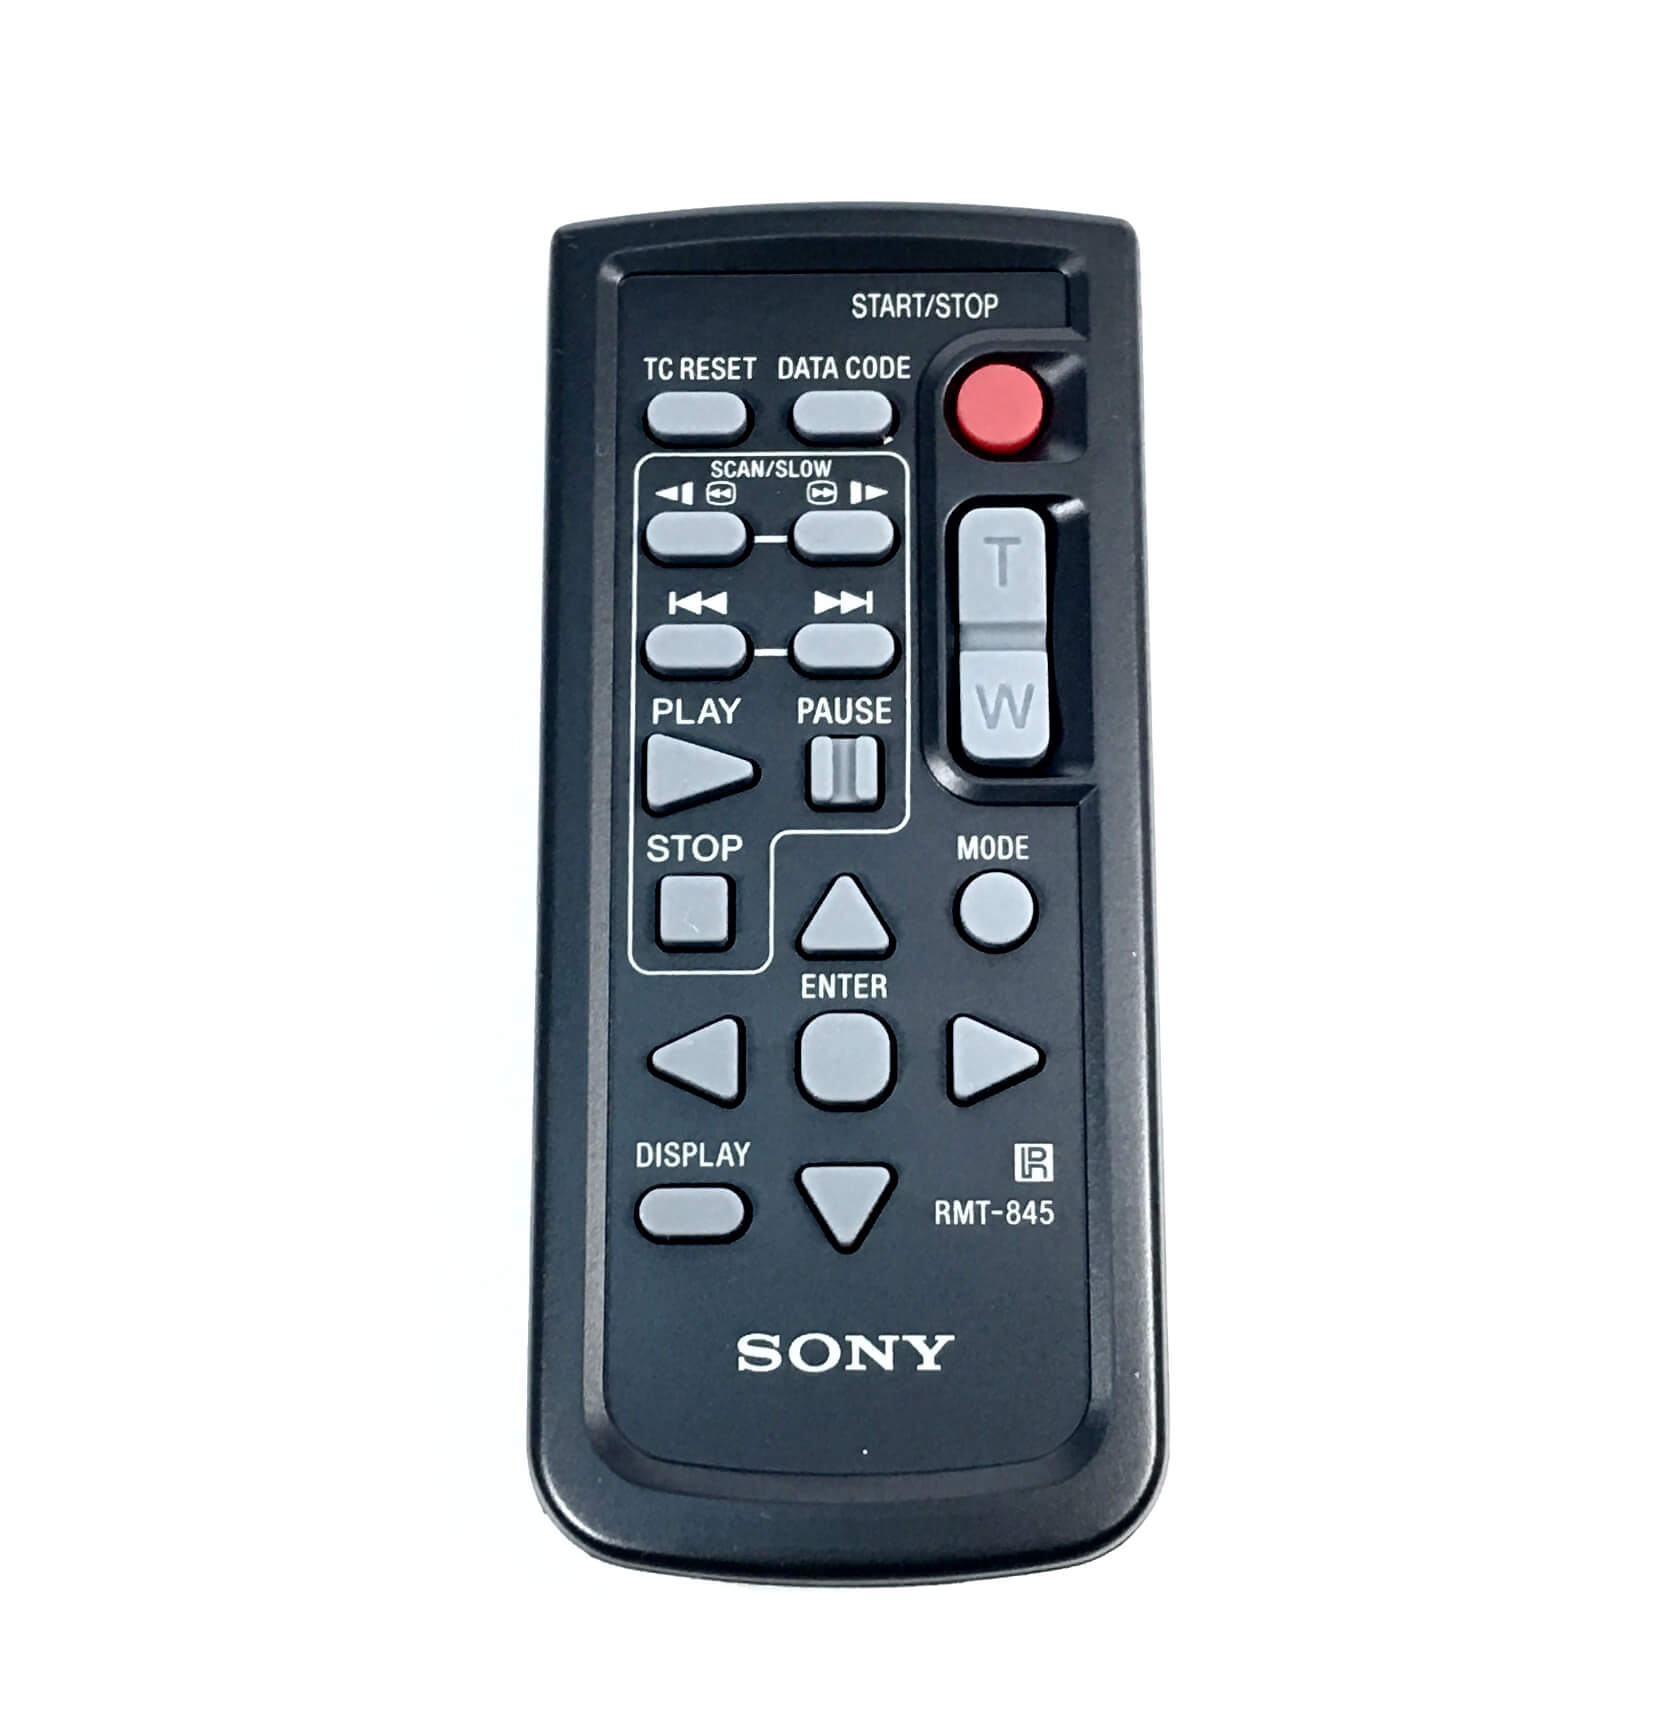 Original wireless remote control that came with the Sony PXW-FS7 camcorder. It is a genuine Sony part, sourced directly from Sony USA. Brand new factory fresh. Free Shipping.